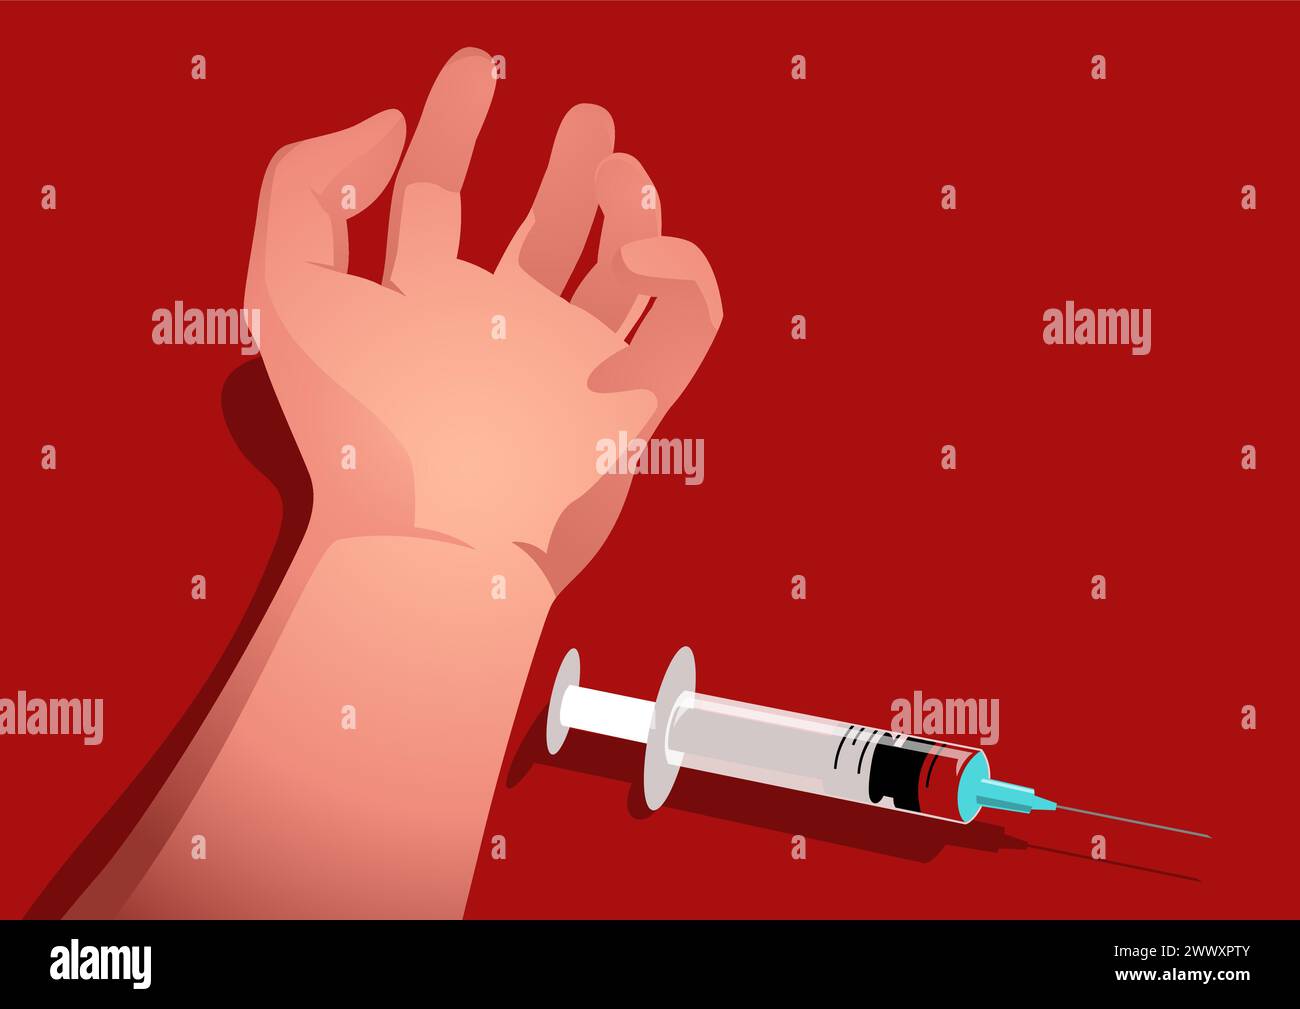 Illustration depicting a limp hand on the floor beside a syringe, awareness about the harsh realities of drug addiction, substance abuse, drug overdos Stock Vector